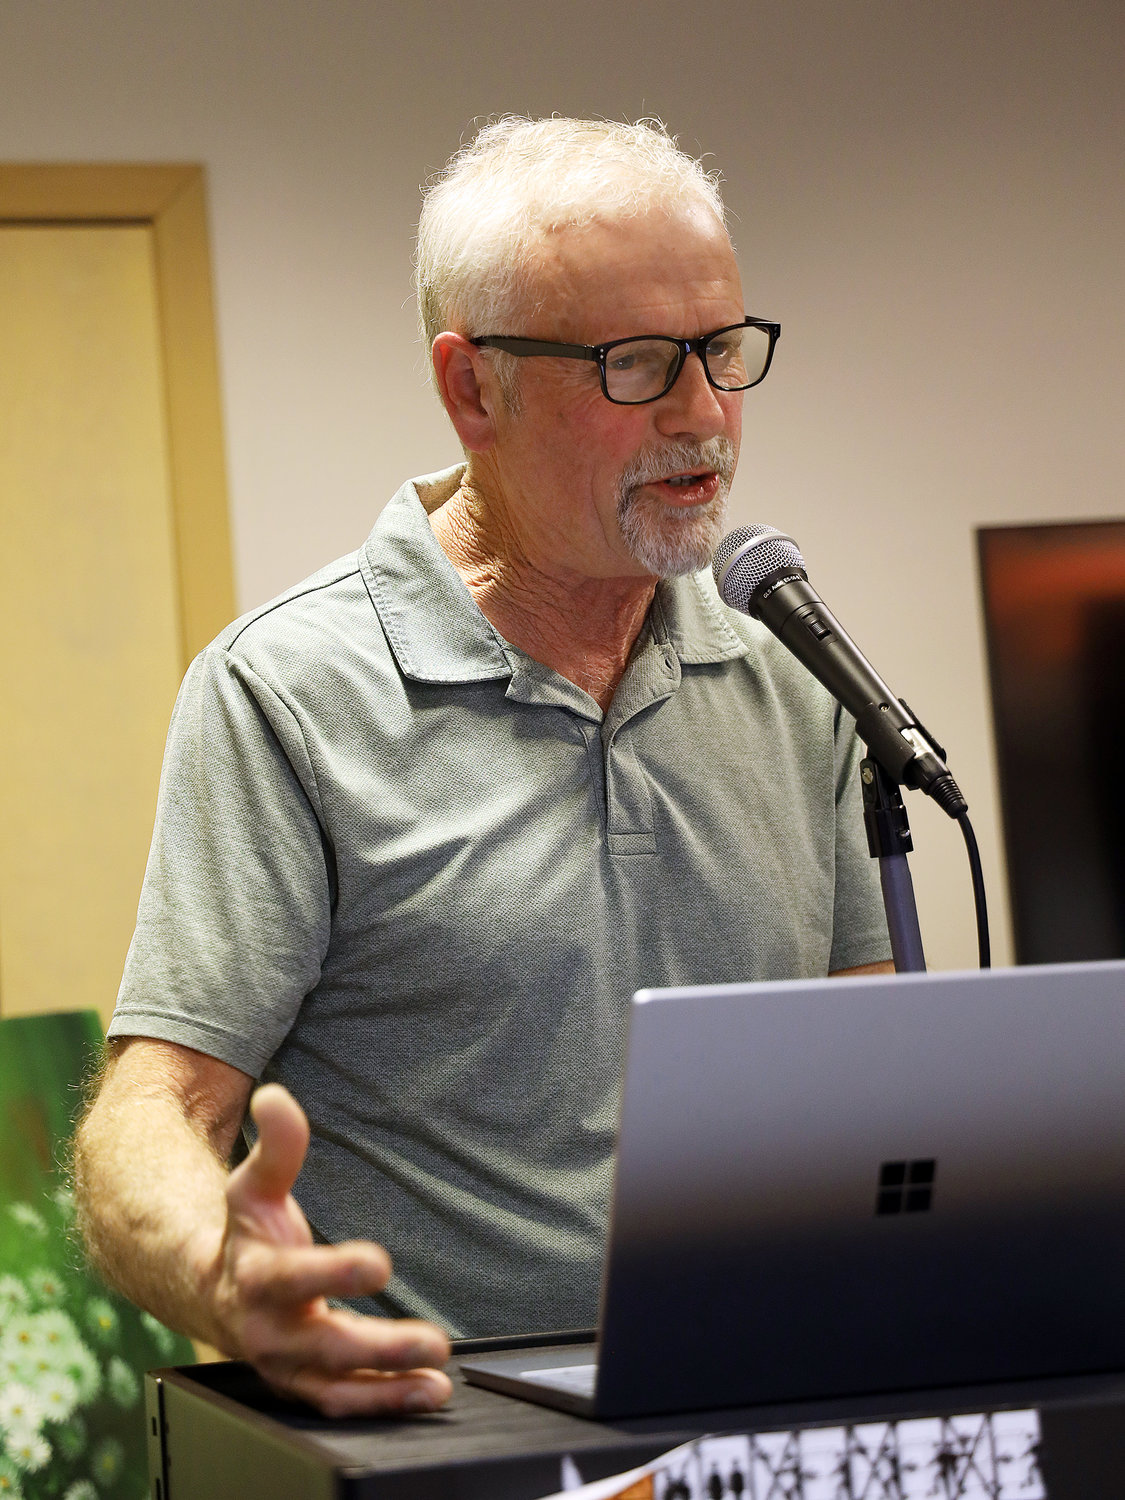 Festival co-founder Maynard Axelson gave a presentation during the festival opening and artist reception on March 17.